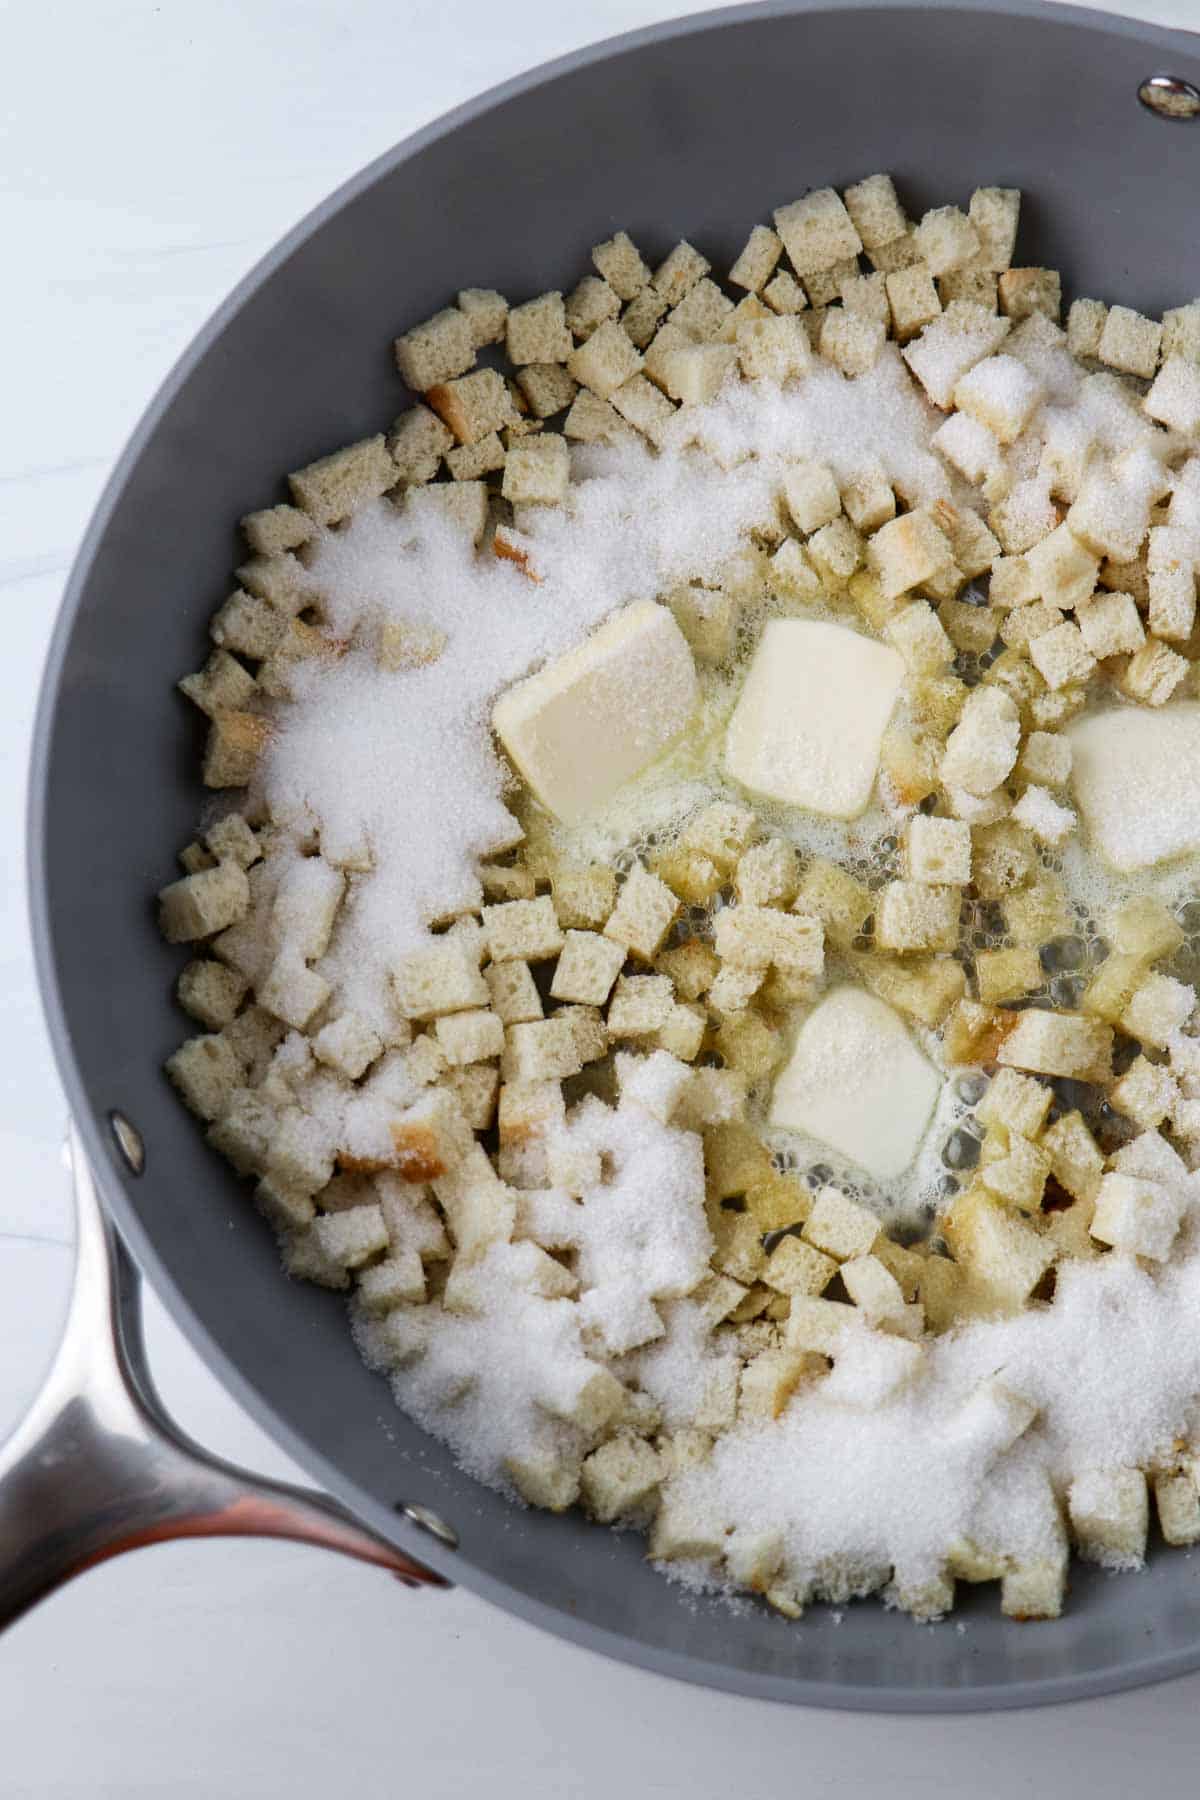 Bread cubes, sugar and butter in a pan.